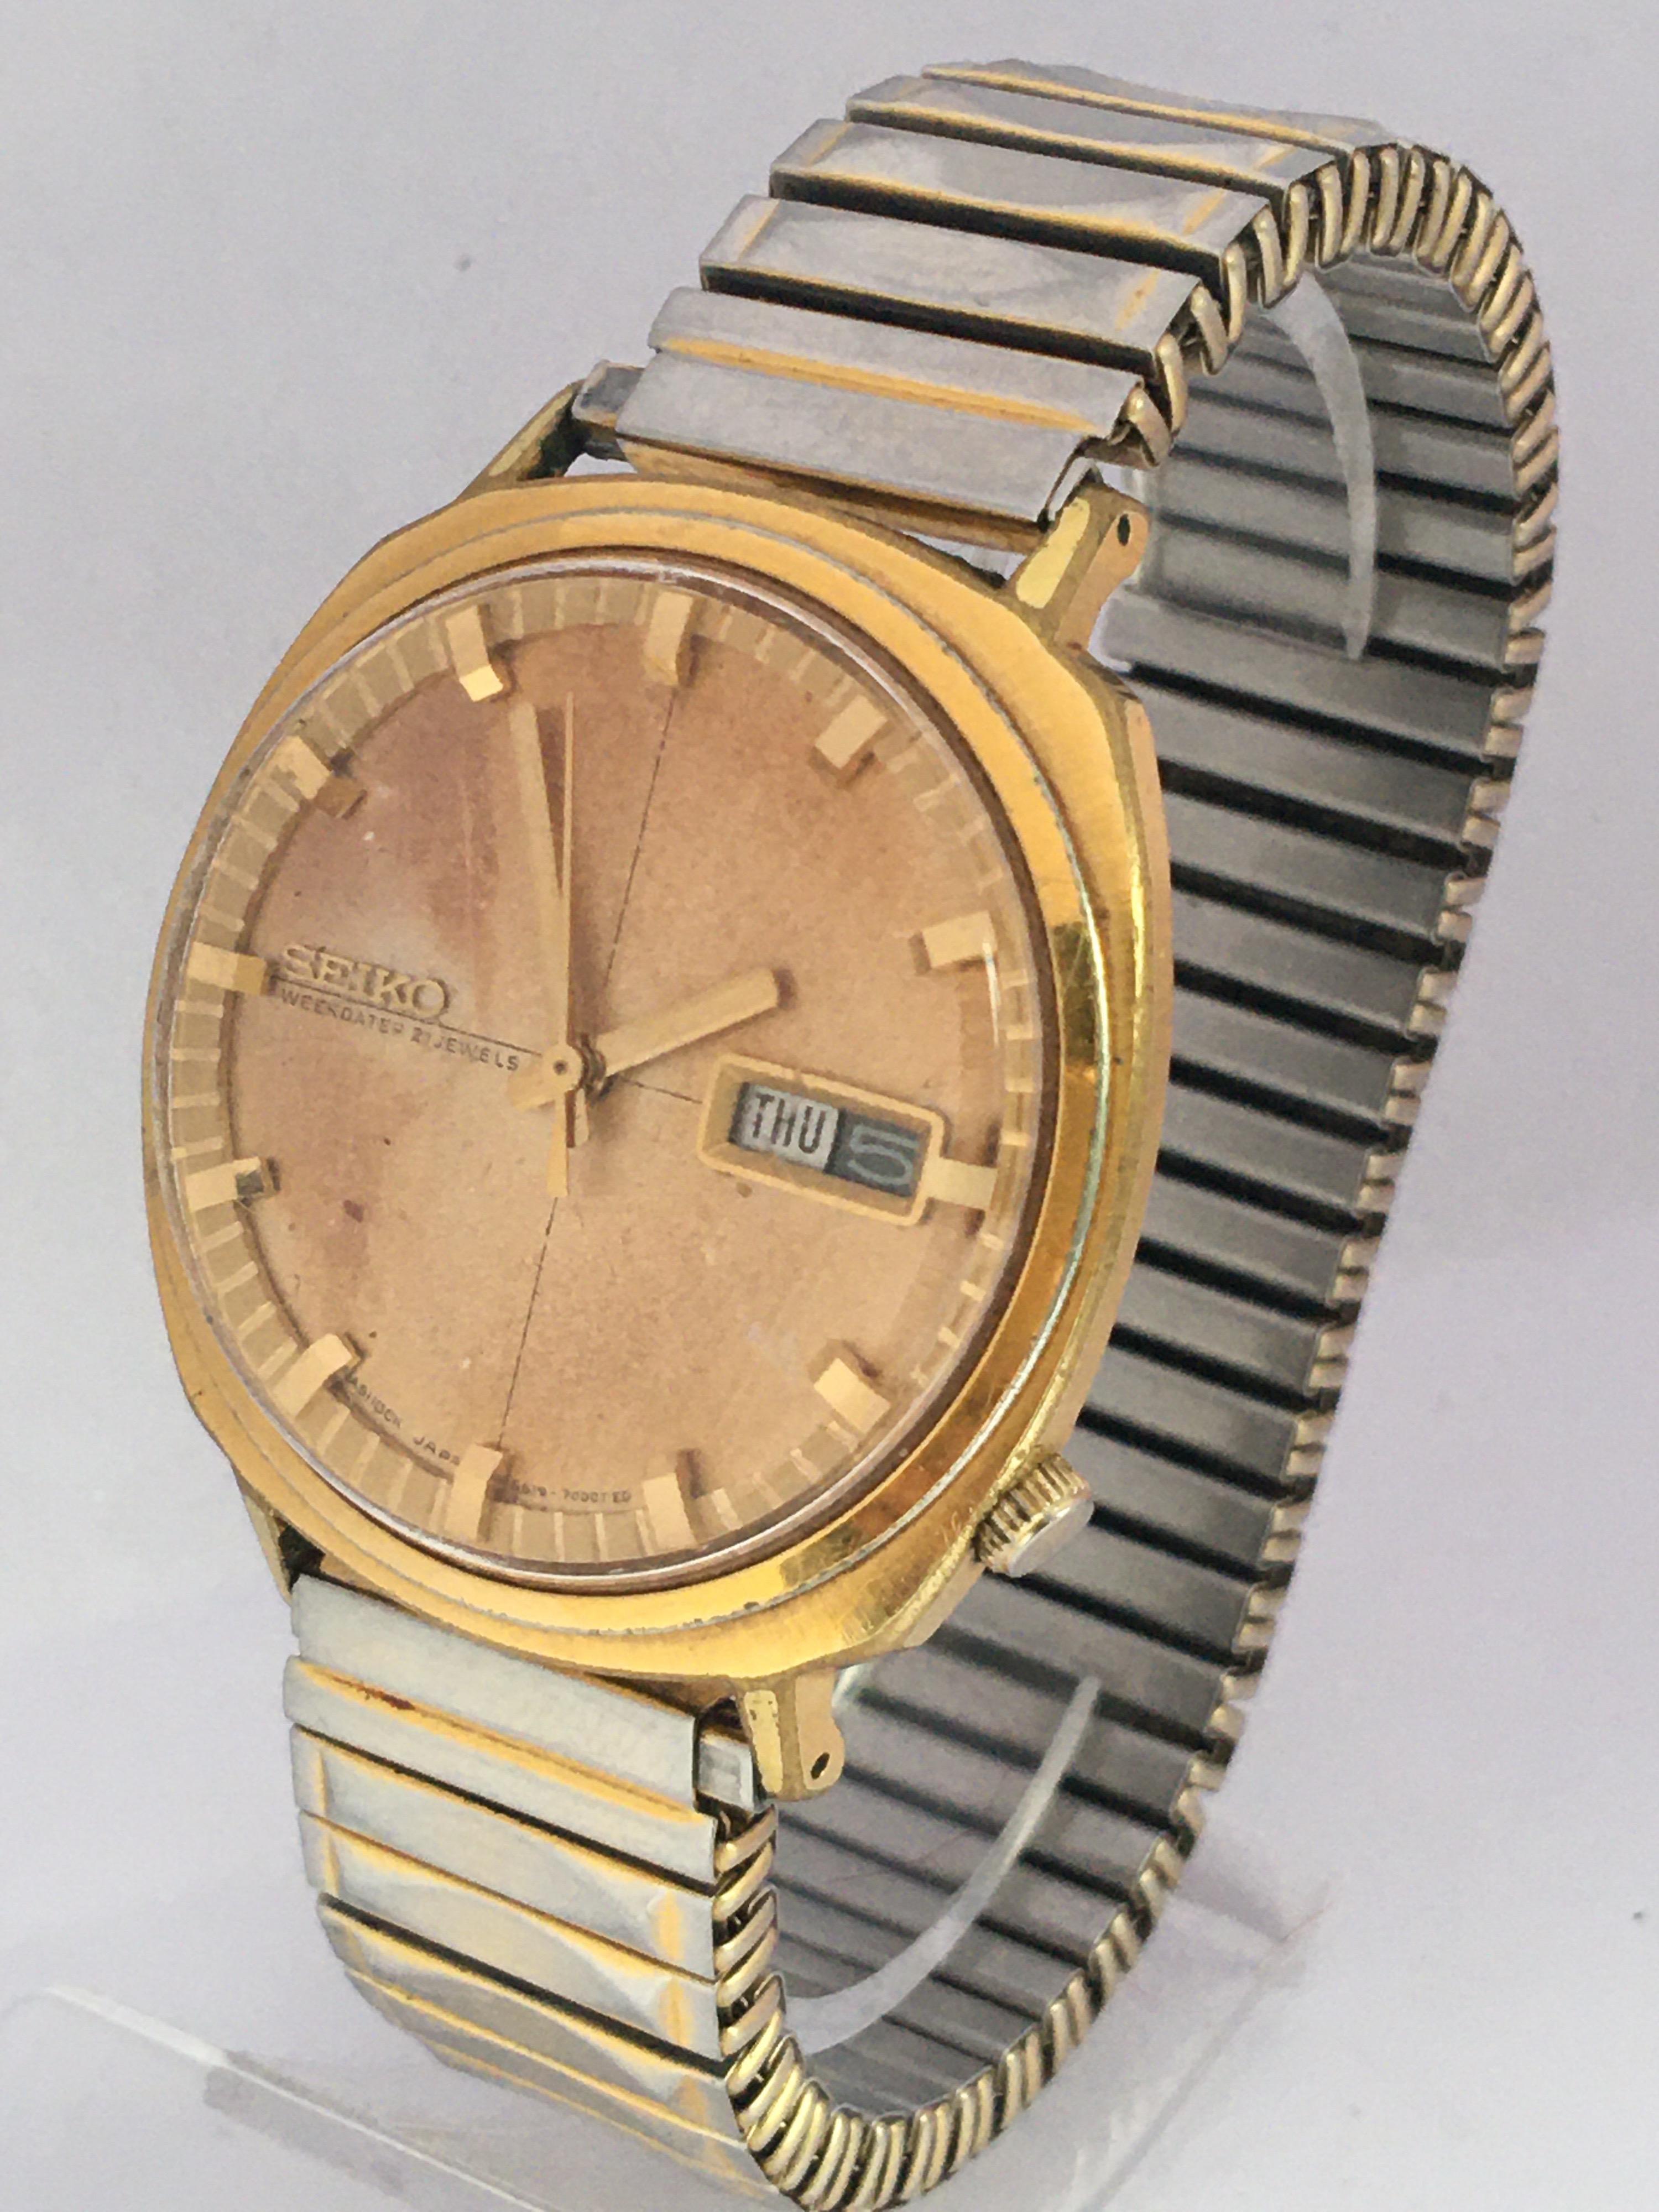 Vintage 1980s Gold-Plated Seiko Automatic Gents Watch In Good Condition For Sale In Carlisle, GB